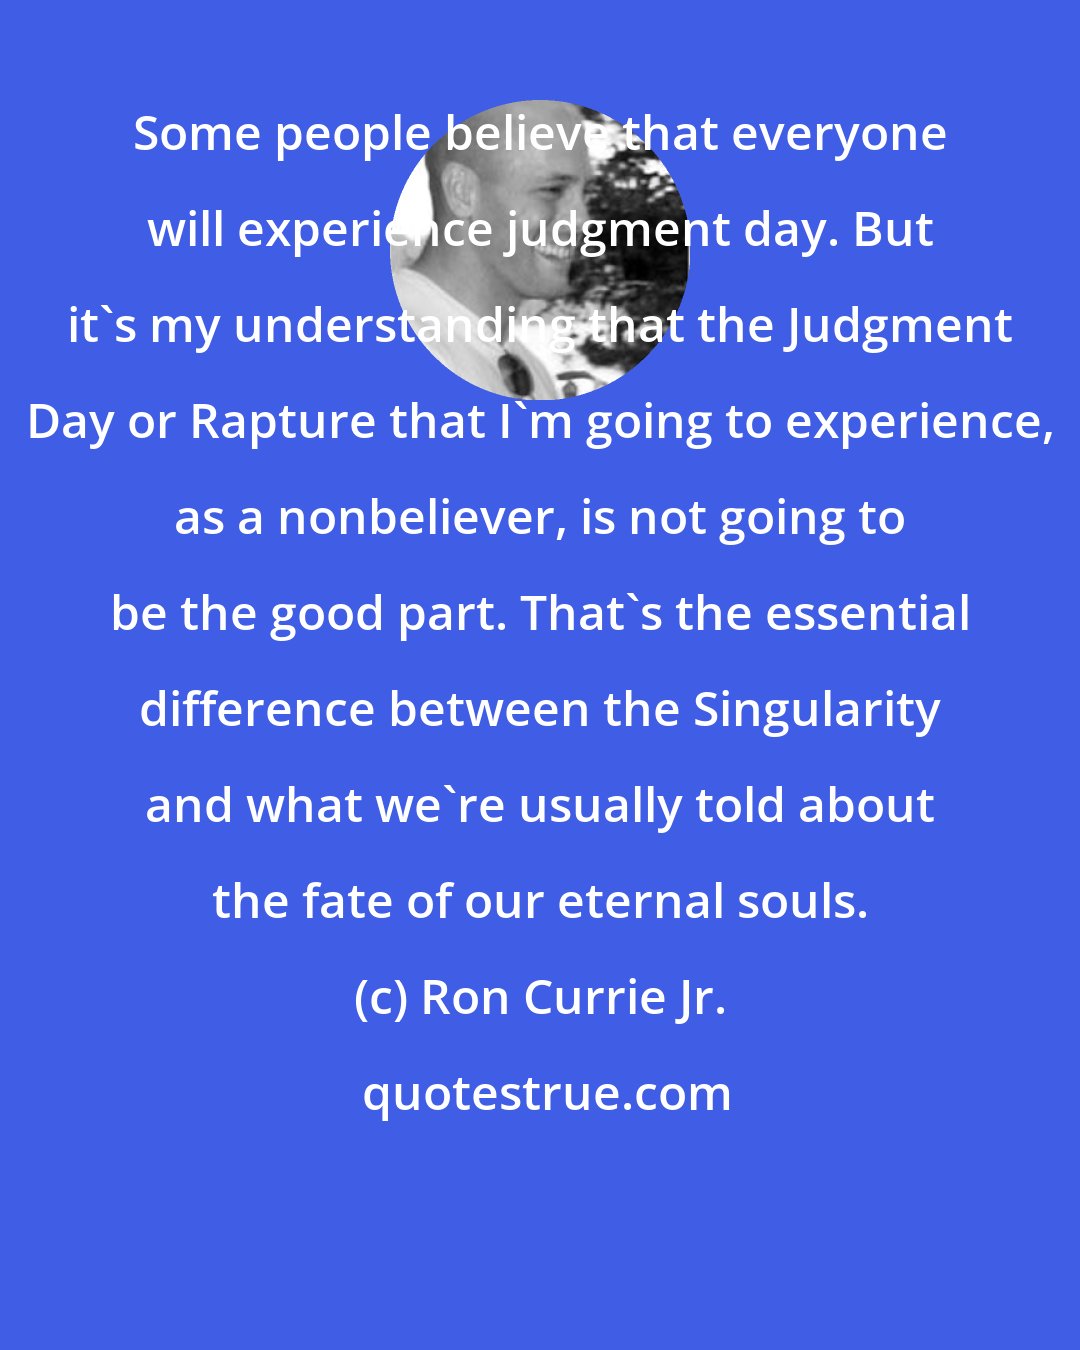 Ron Currie Jr.: Some people believe that everyone will experience judgment day. But it's my understanding that the Judgment Day or Rapture that I'm going to experience, as a nonbeliever, is not going to be the good part. That's the essential difference between the Singularity and what we're usually told about the fate of our eternal souls.